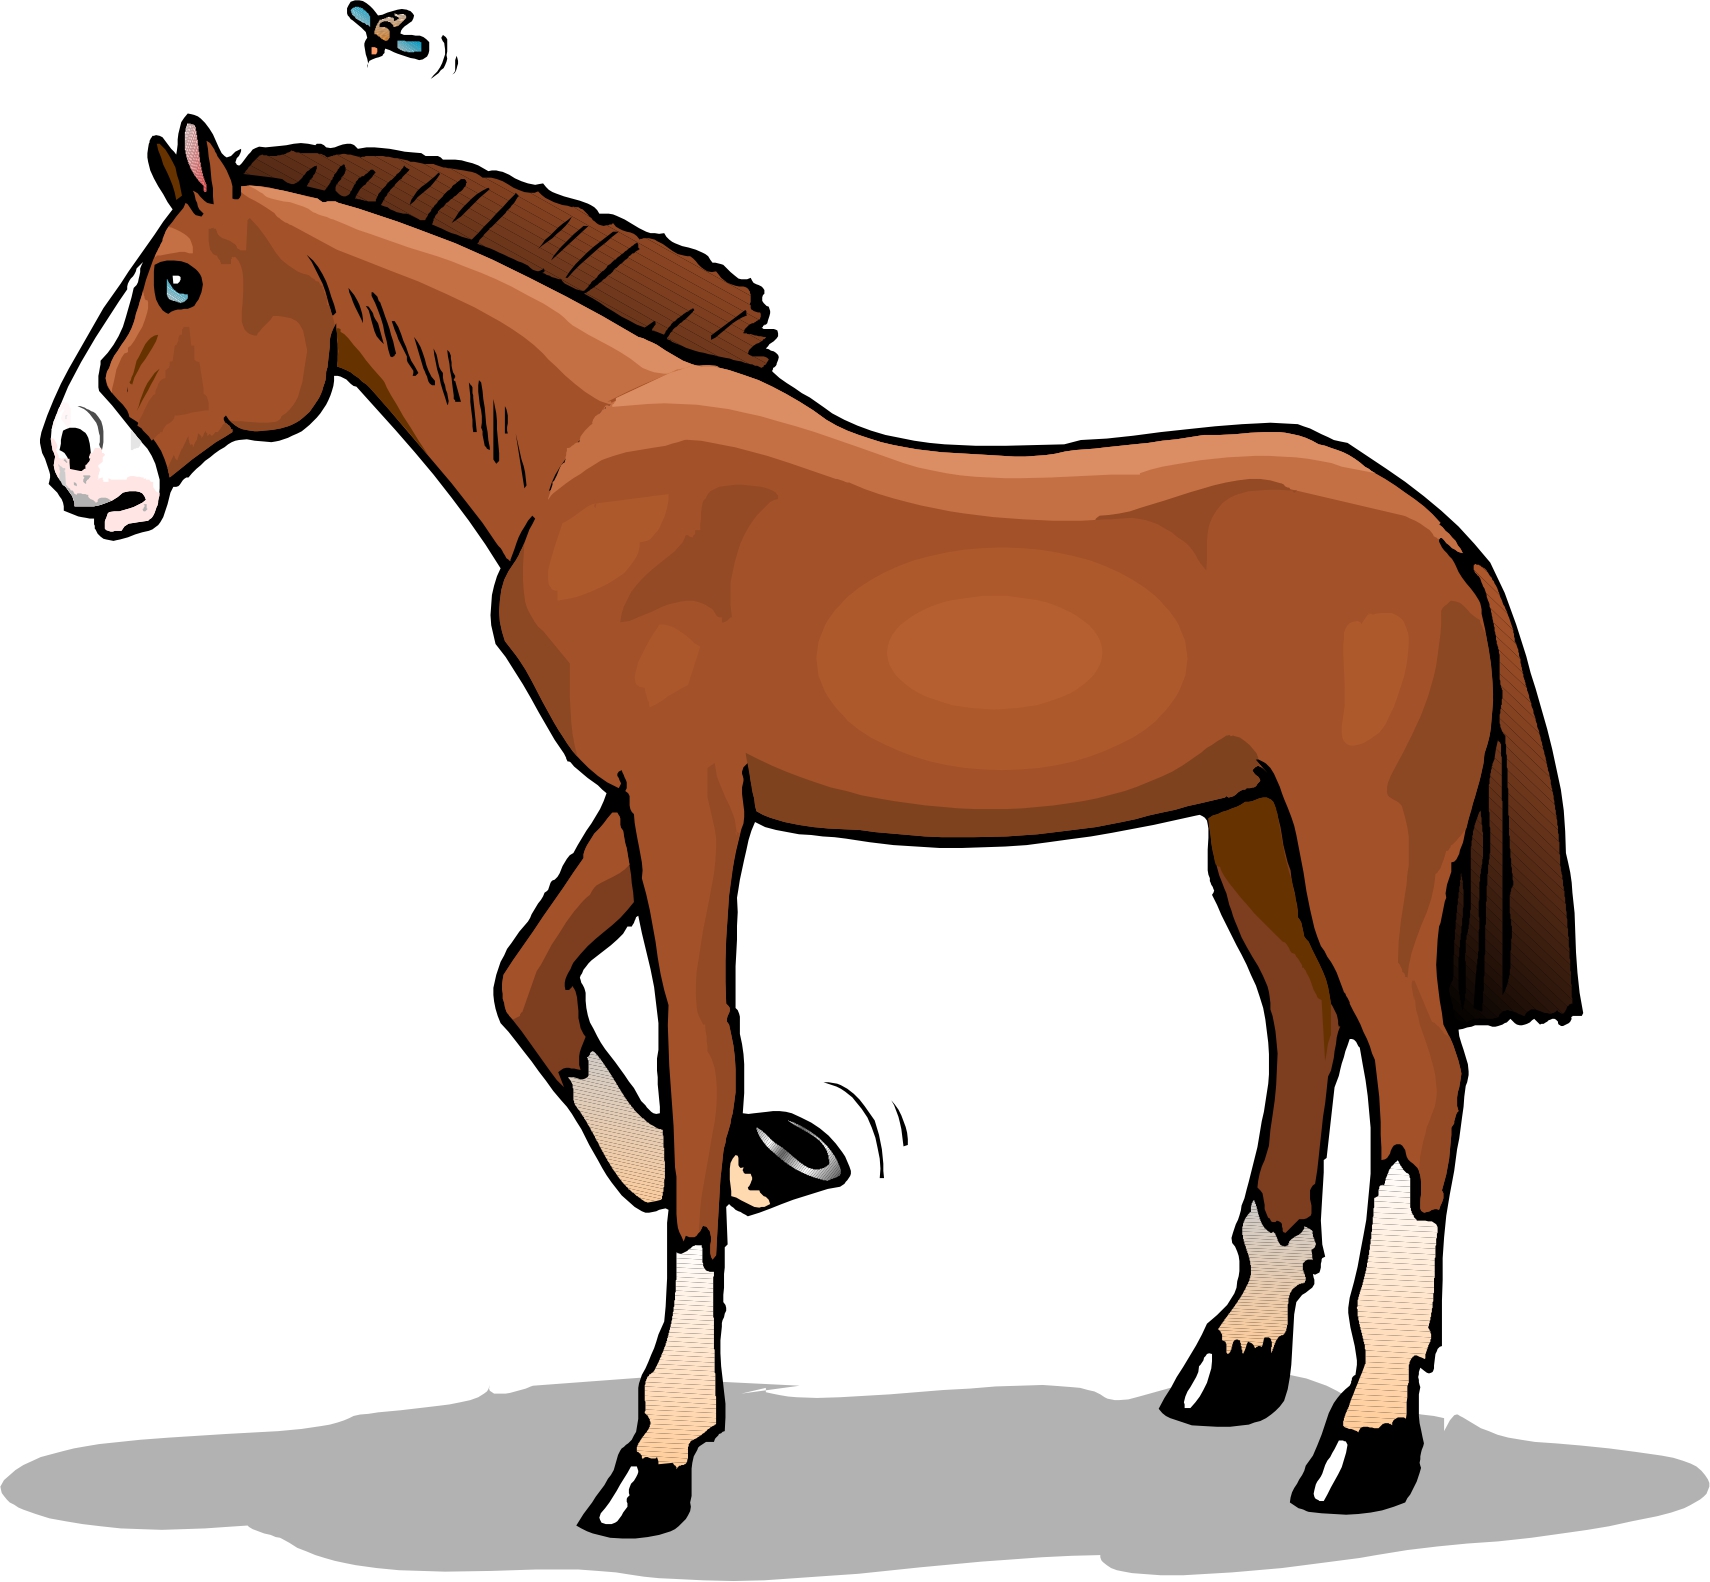 Pretty Horse Cartoon Pictures - ClipArt Best